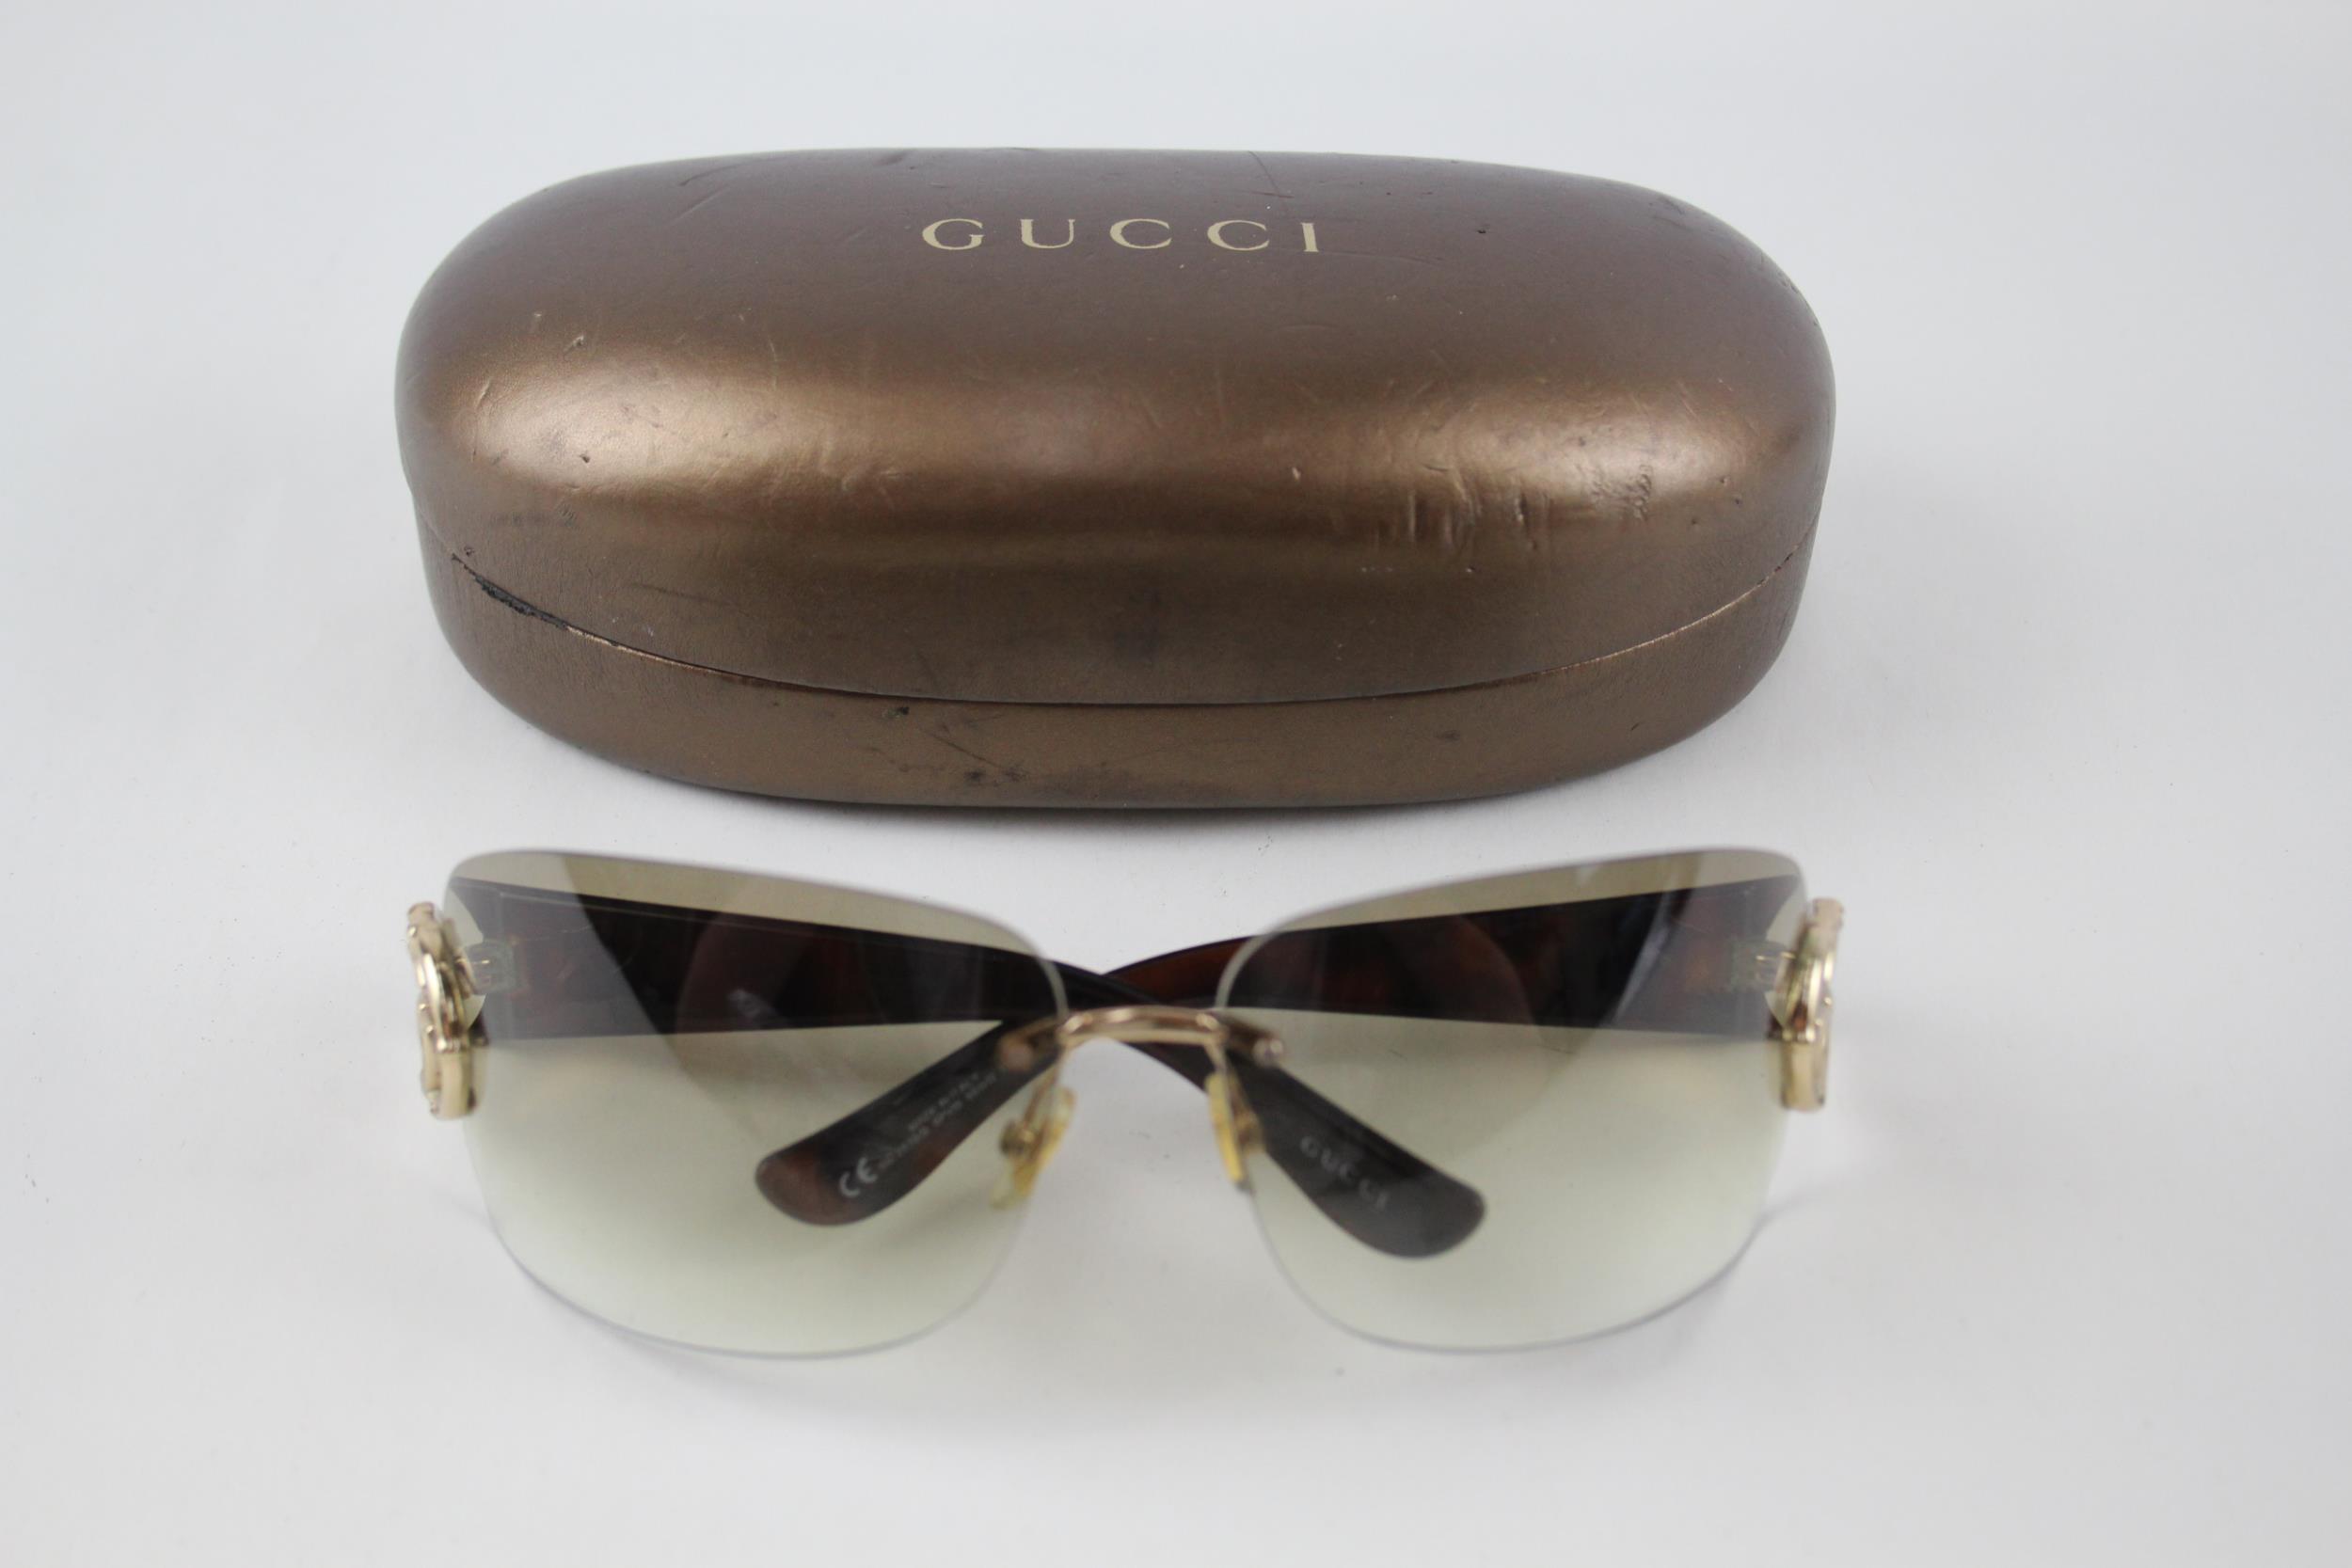 Designer Gucci Sunglasses In Case - Items are in previously owned condition Signs of age & wear